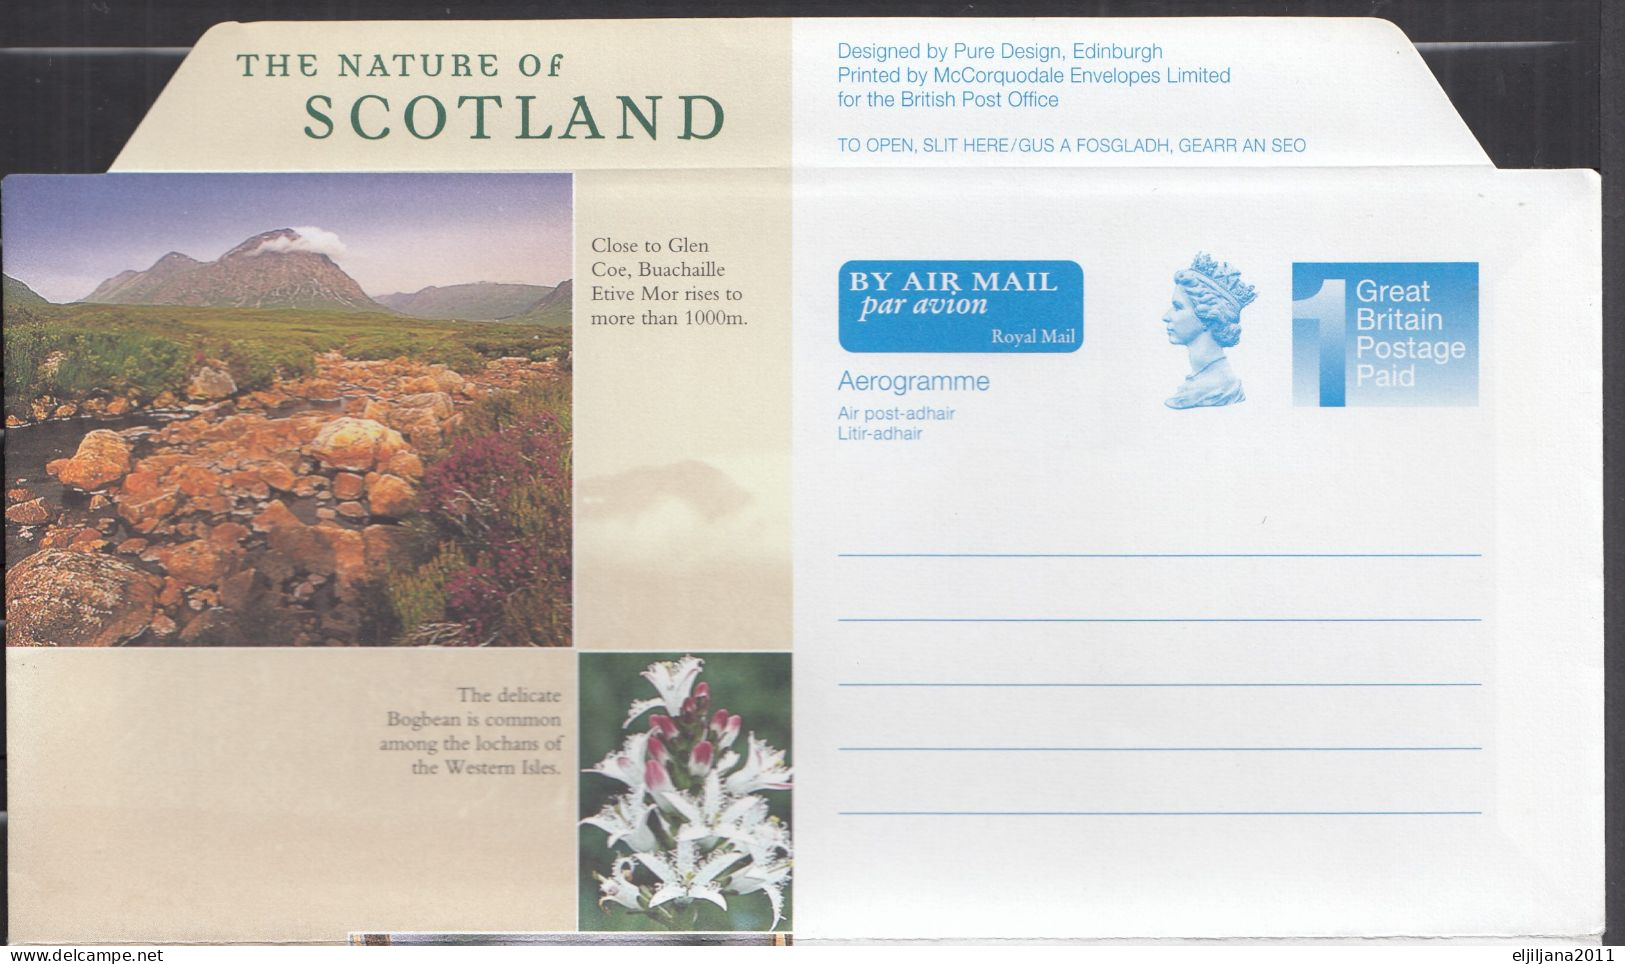 Great Britain - GB / UK, QEII 1997 ⁕ BY AIR MAIL Aerogramme, Royal Mail, The Nature Of SCOTLAND ⁕ Unused Cover - Stamped Stationery, Airletters & Aerogrammes